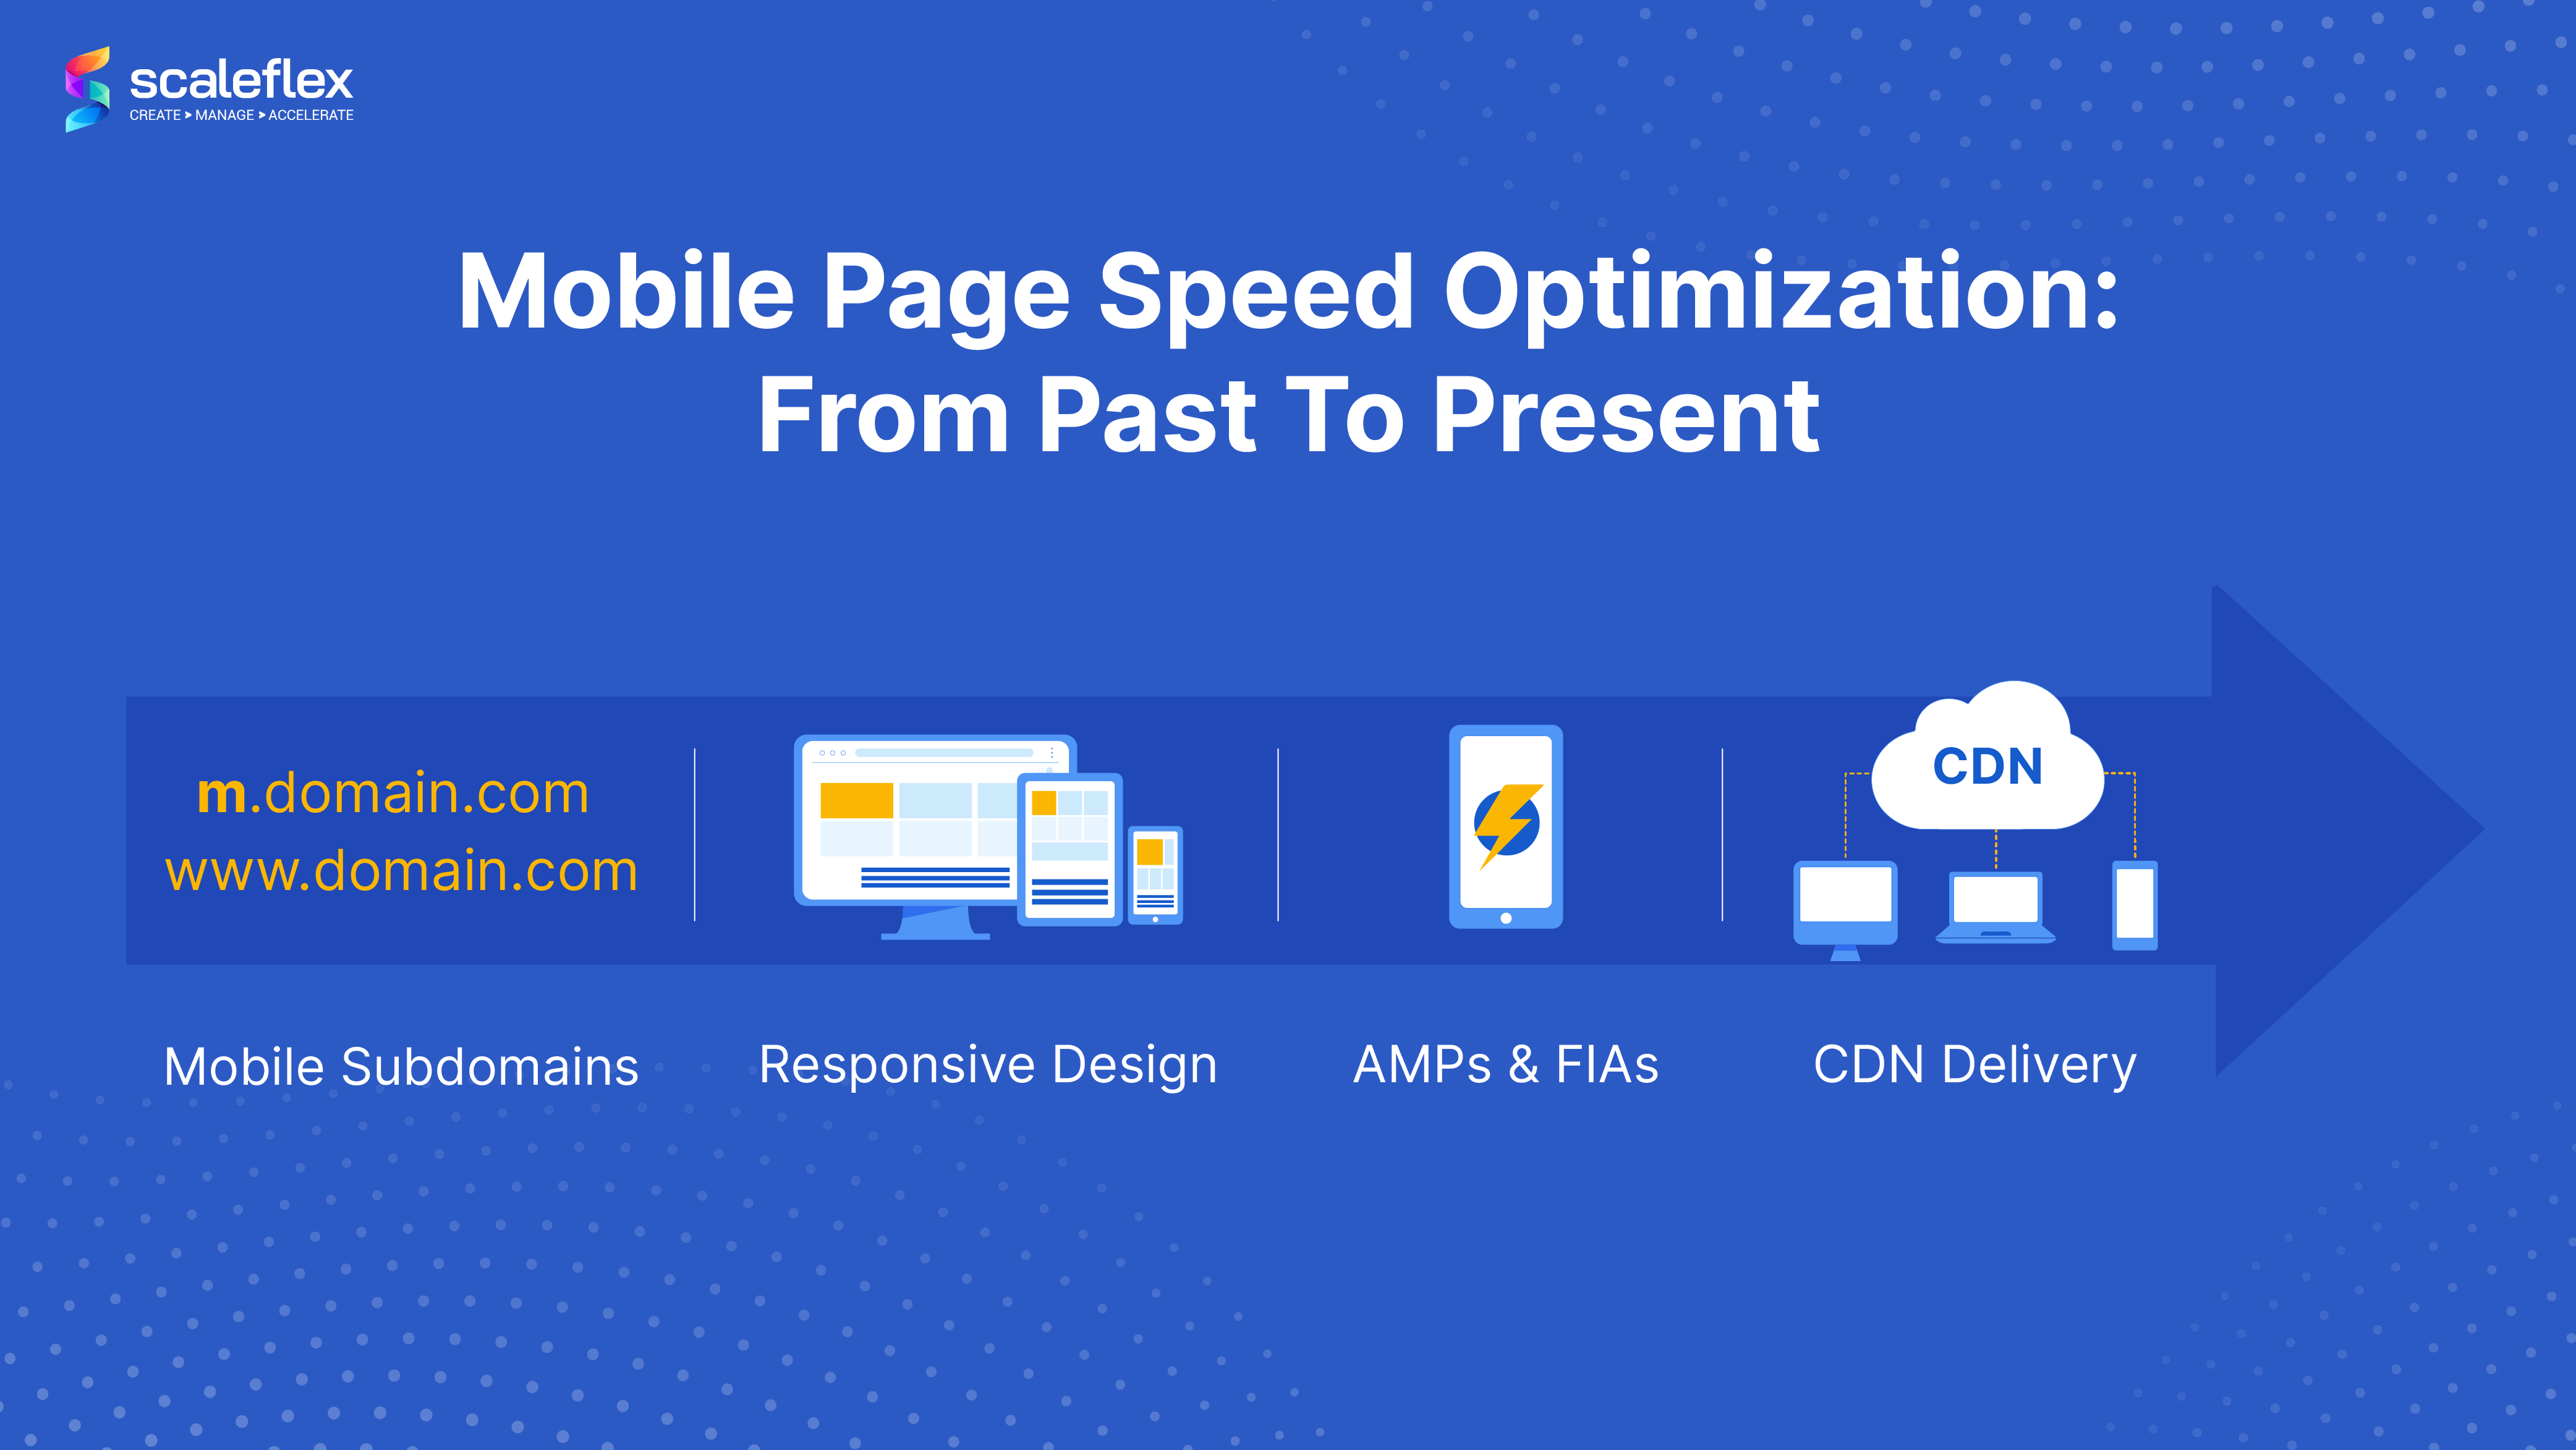 Mobile page speed optimization: From past to present